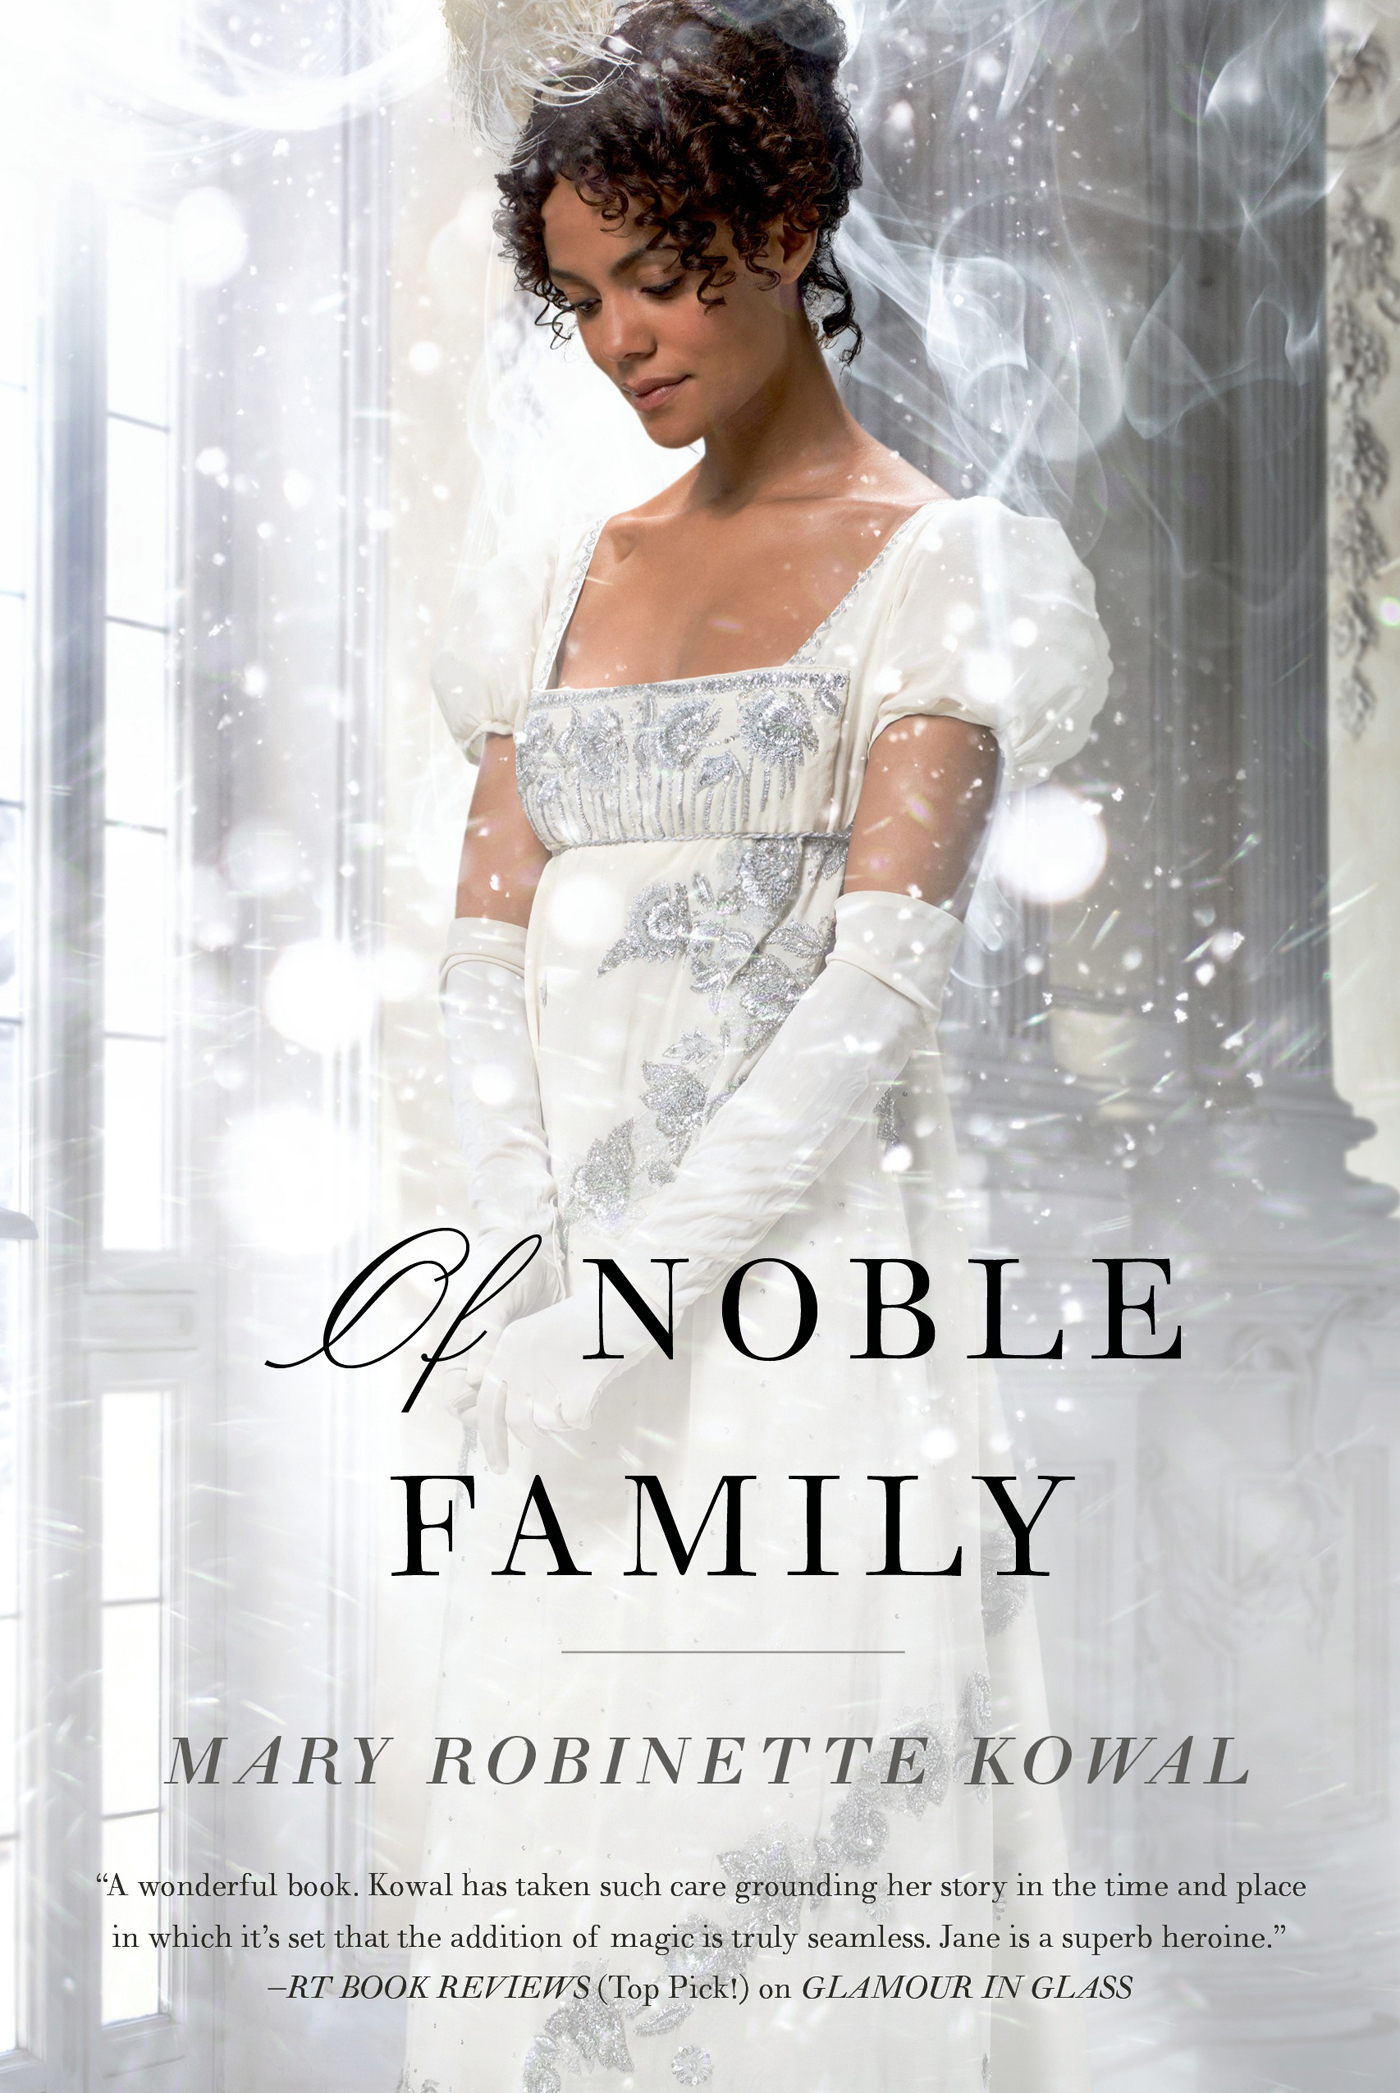 Of Noble Family by Mary Robinette Kowal